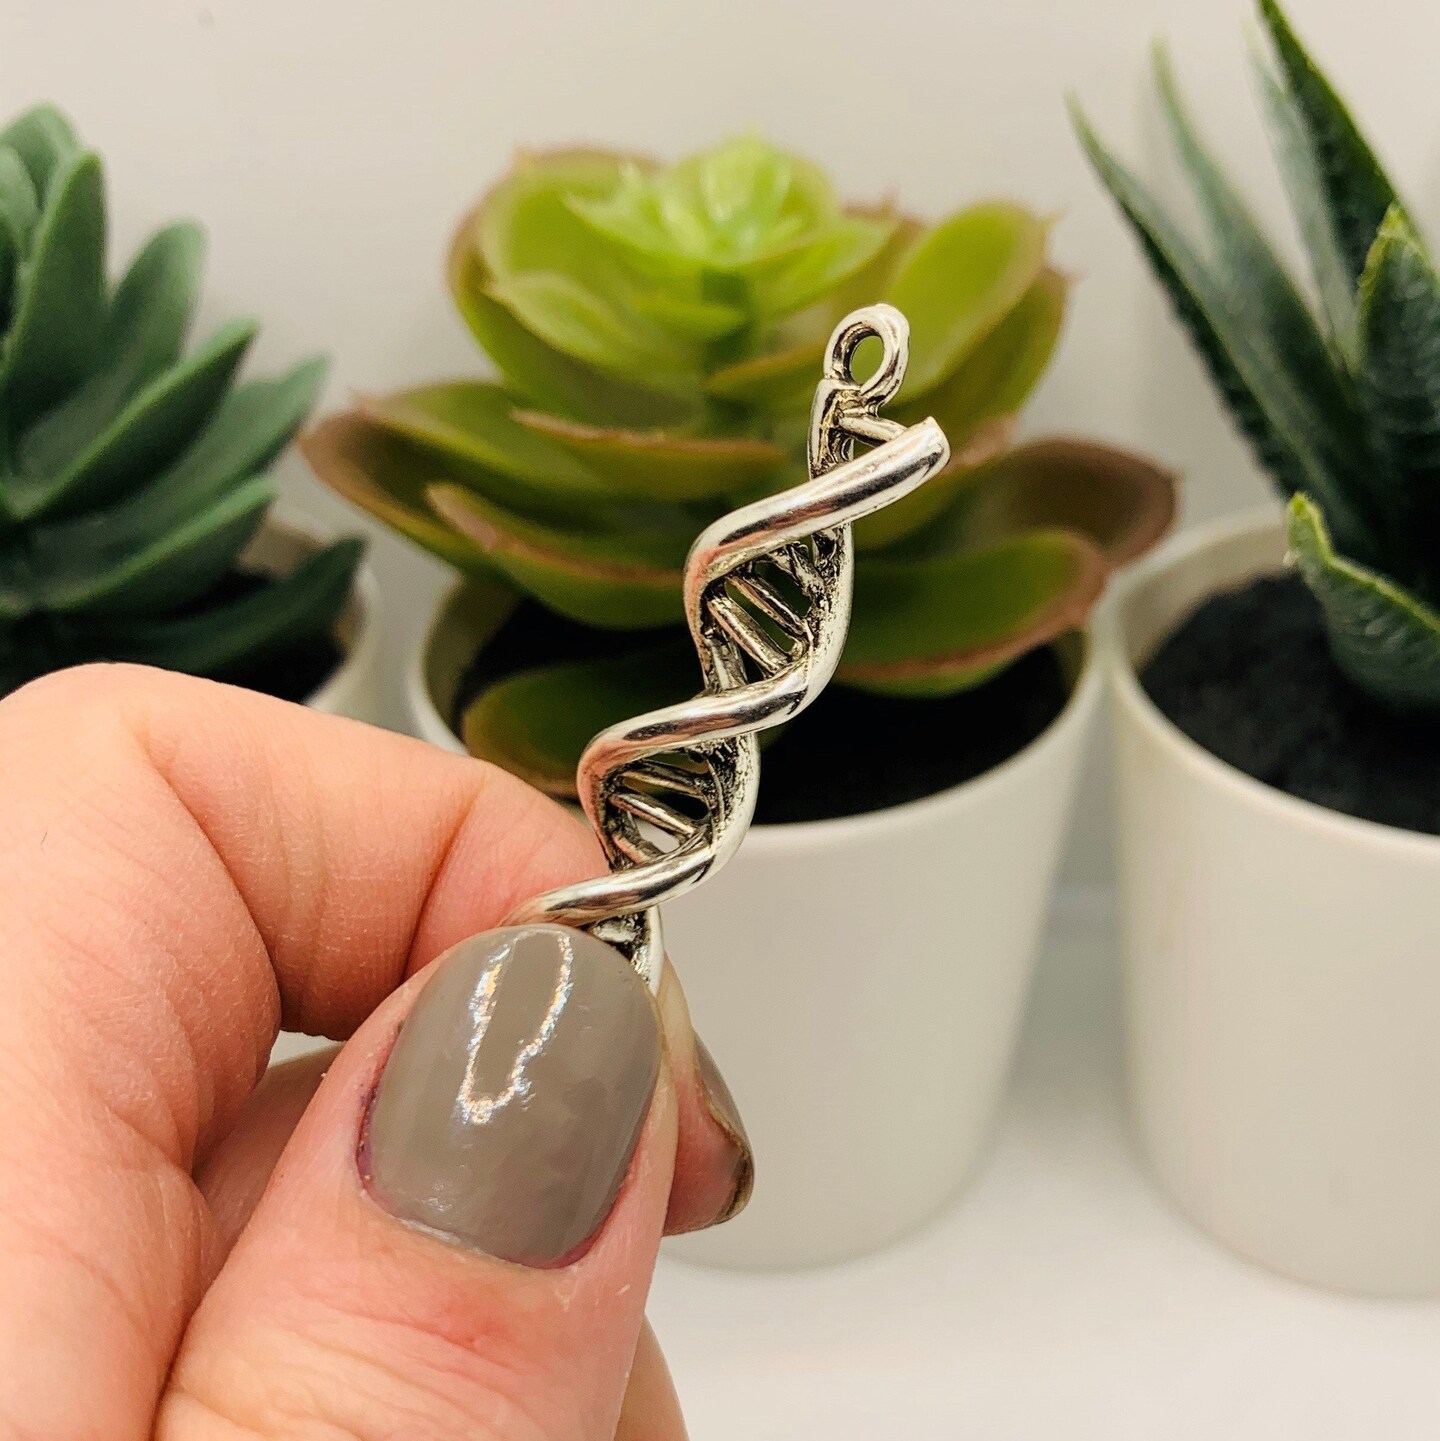 4, 12 or 25 Pieces: Silver DNA Helix Genealogy 3D Pendant Charms